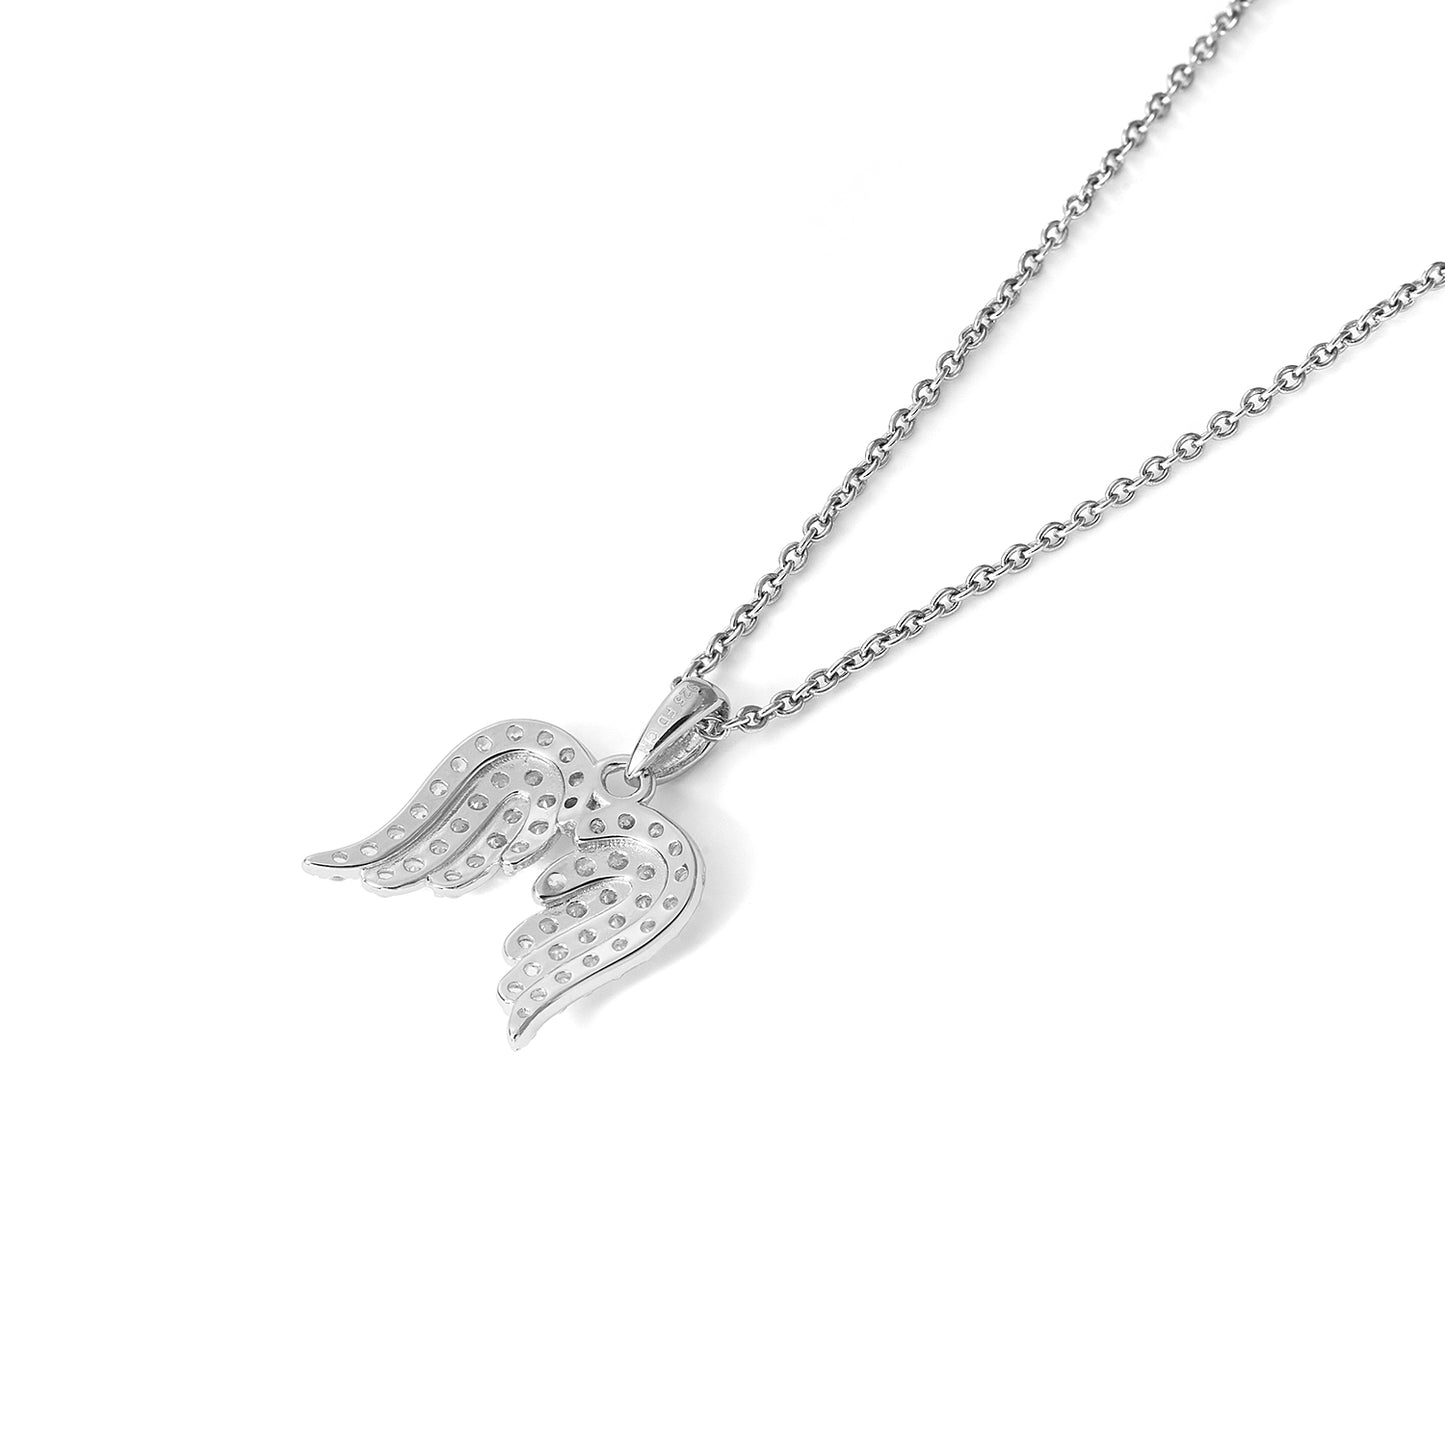 Custom 925 Sterling Silver Vintage Pendant with Angel Wings Exquisite Gift Feather Pendant Men and Women Silver Jewelry